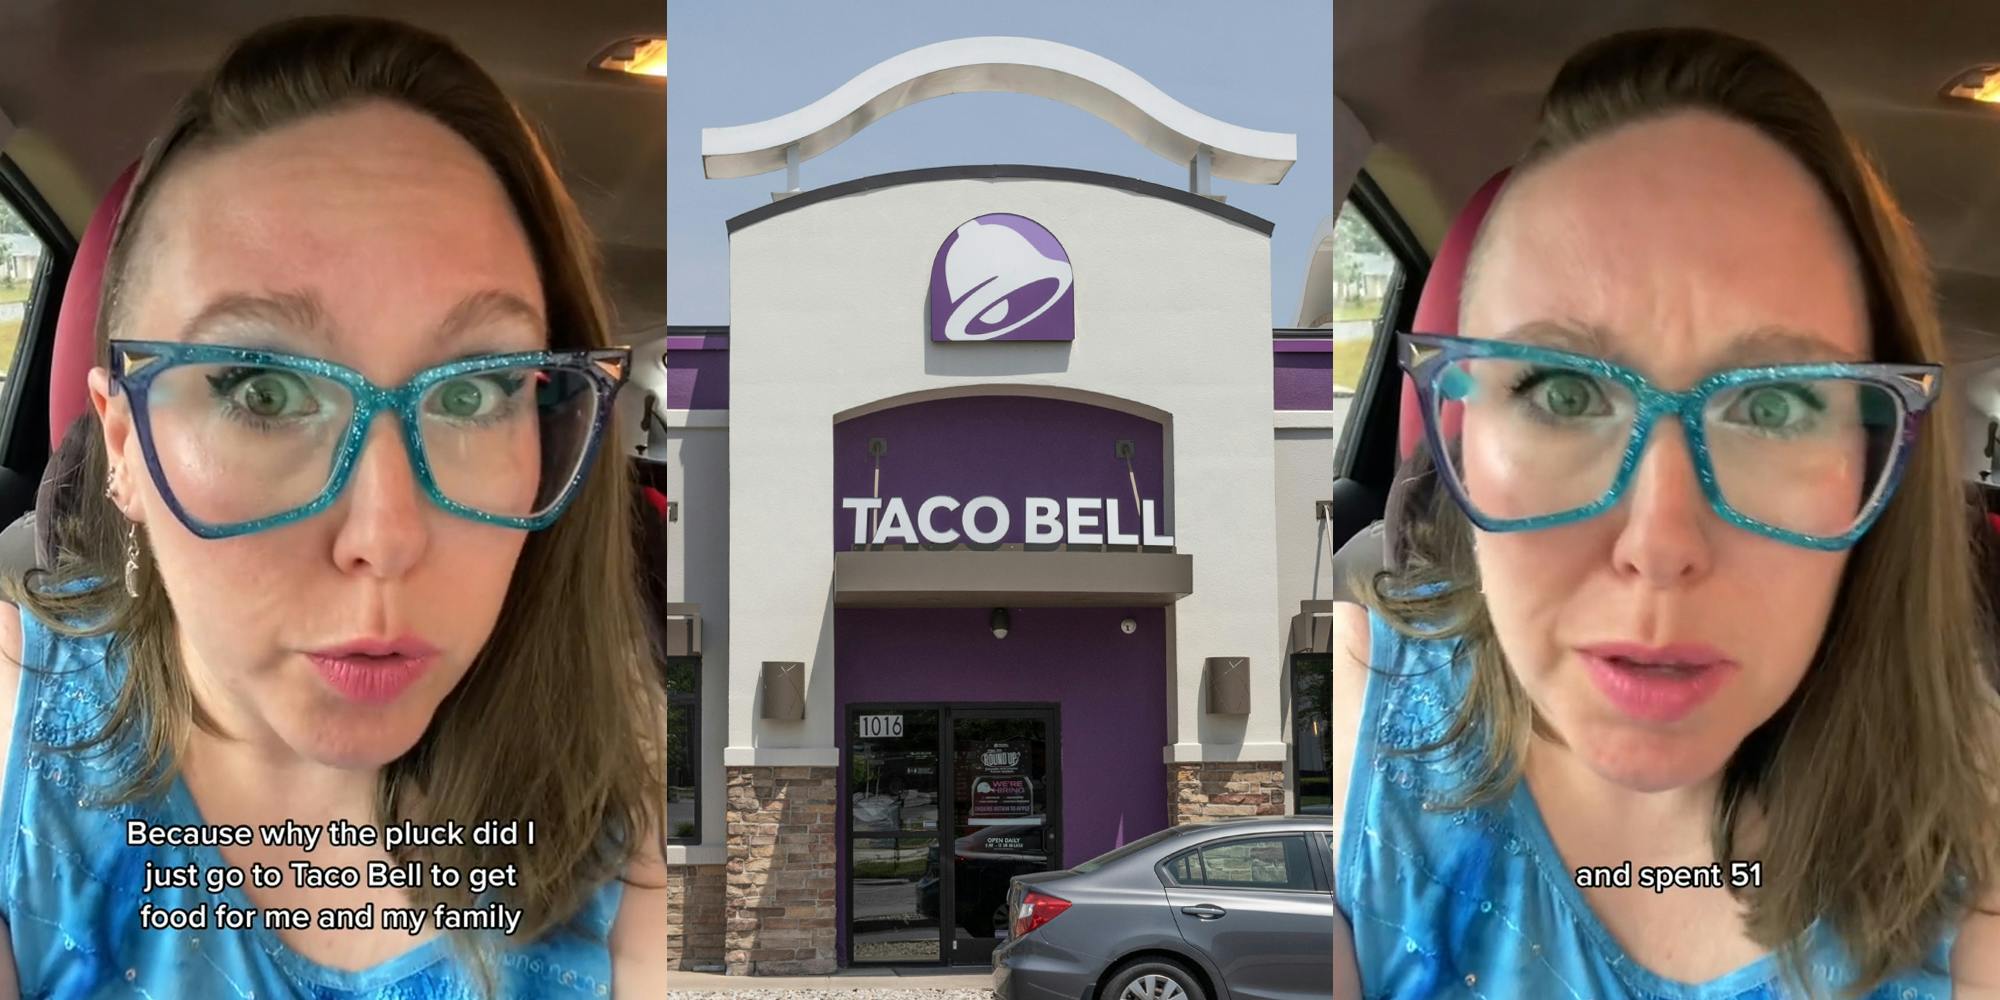 Taco Bell customer speaking in car with caption "Because why the pluck did I just go to Taco Bell to get food for me and my family" (l) Taco Bell building entrance with sign (c) Taco Bell customer speaking in car with caption "and spent 51" (r)